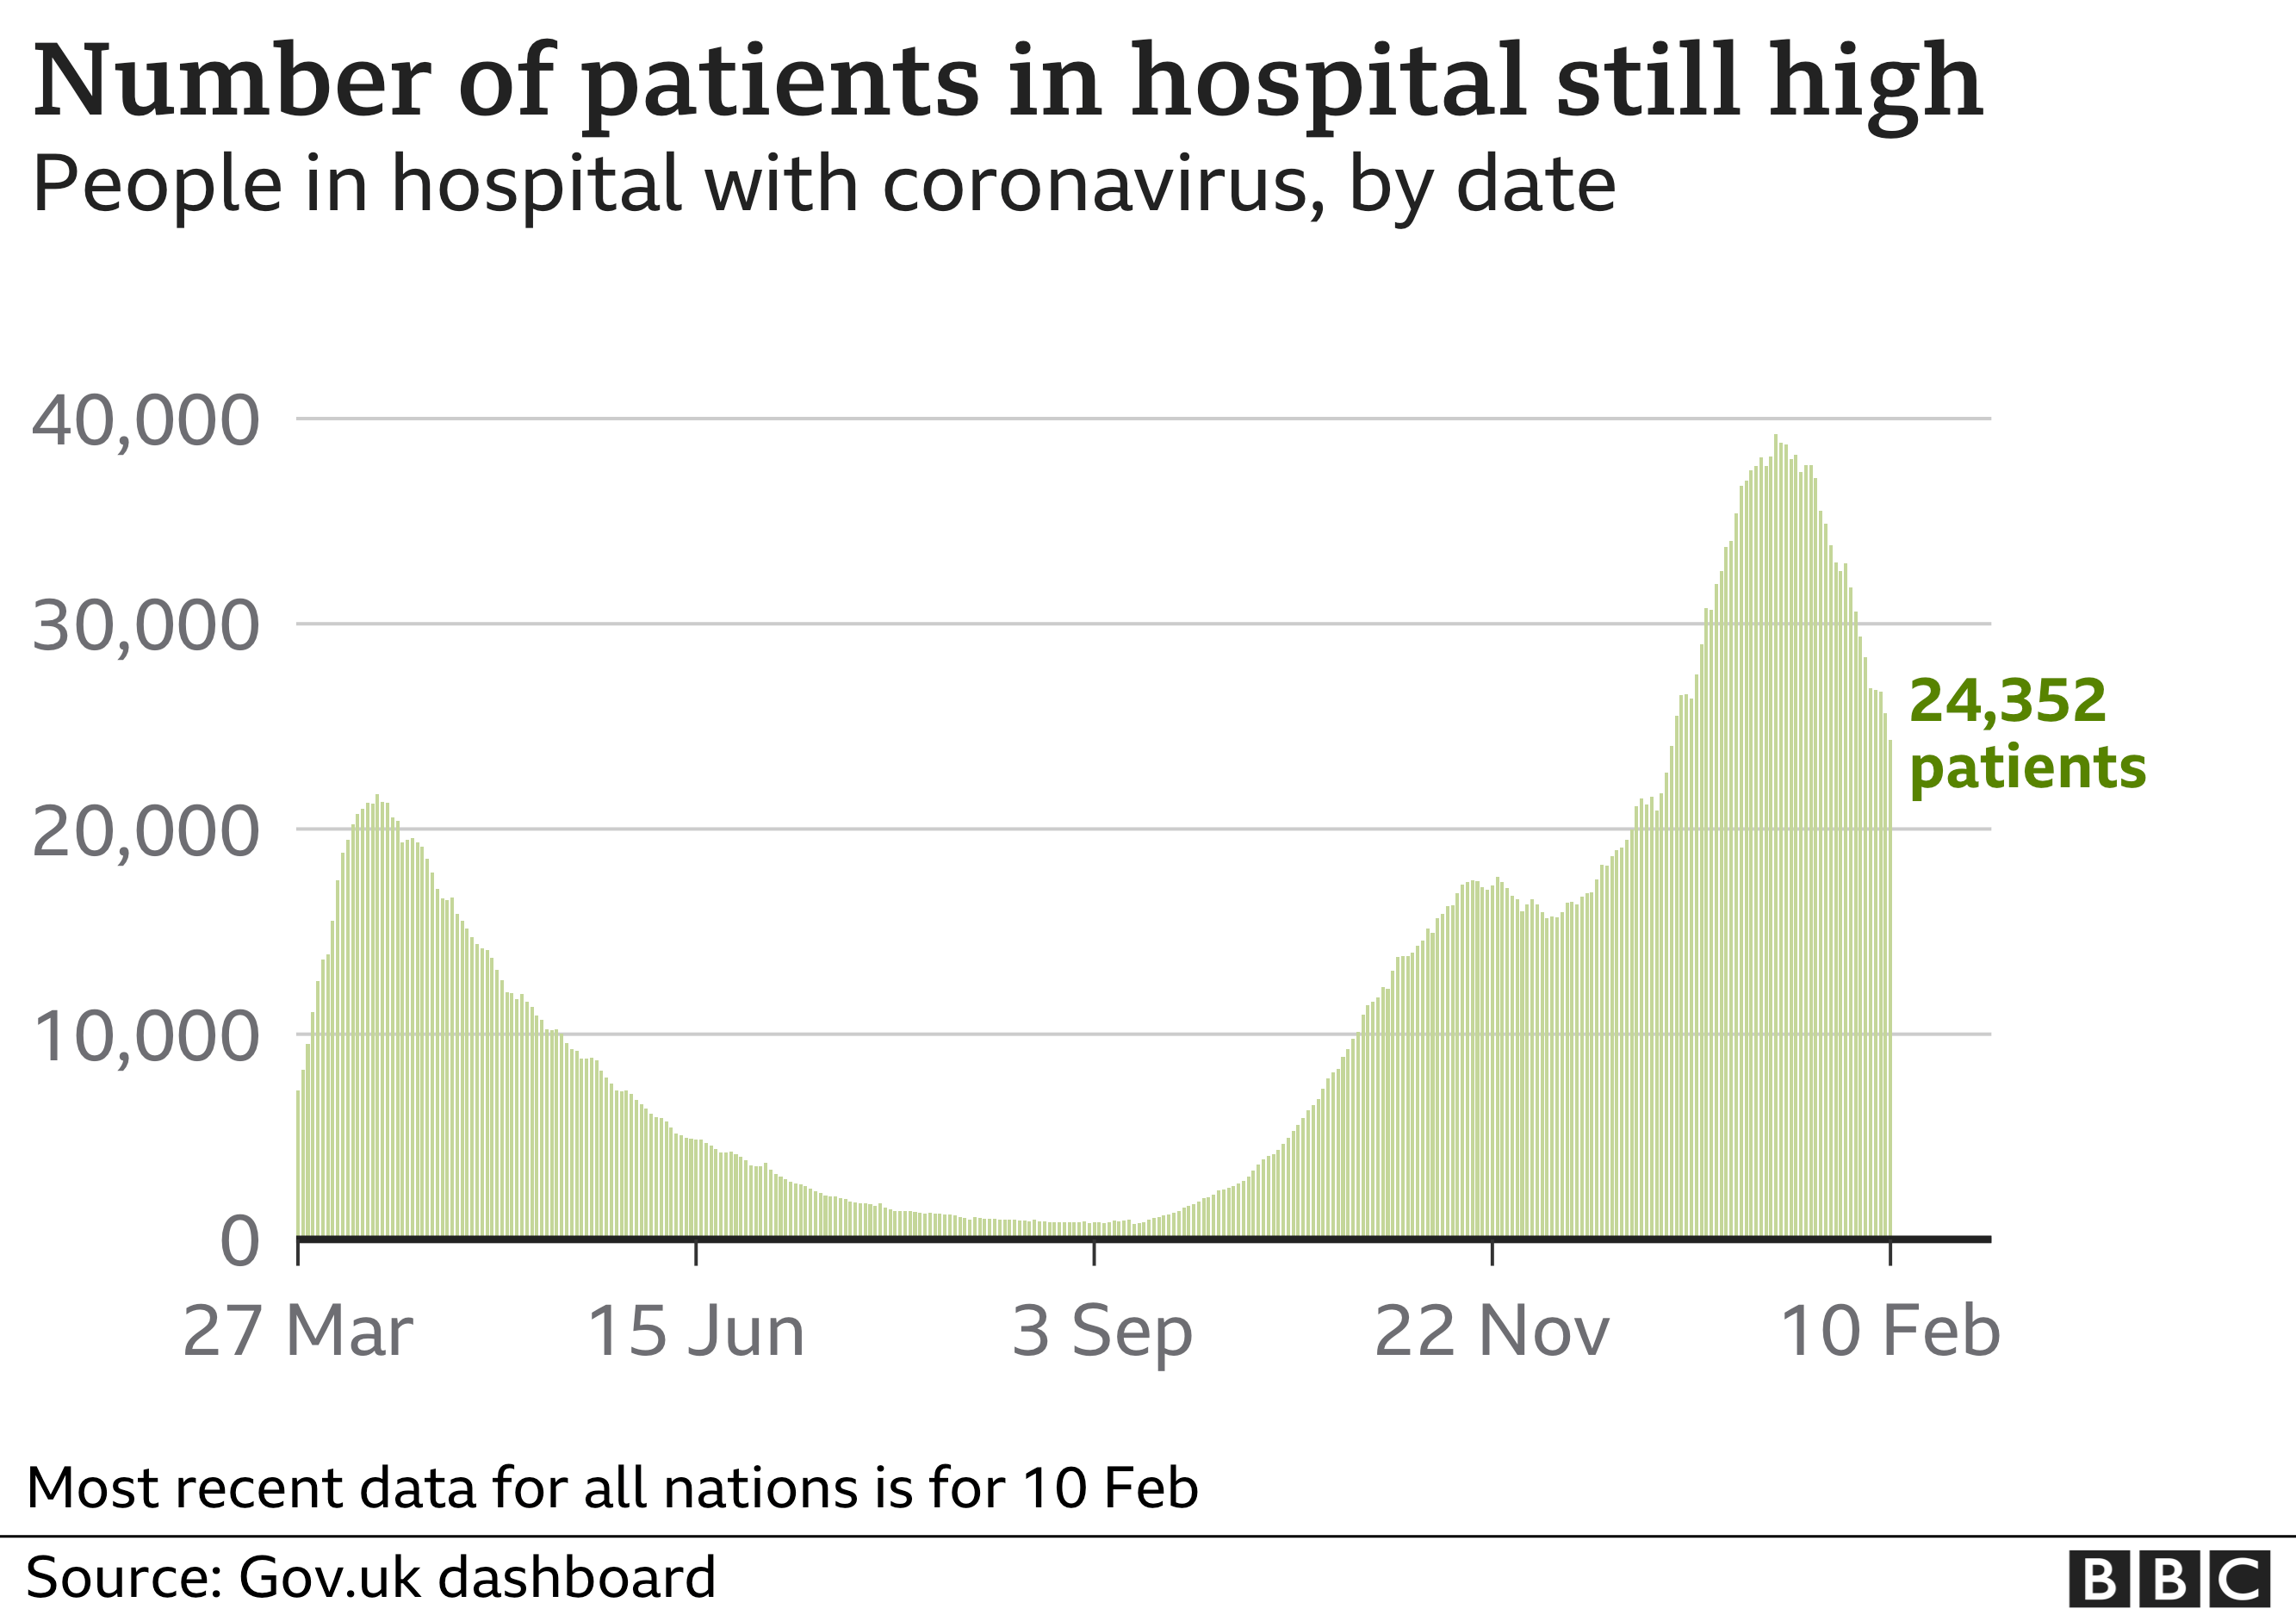 Graph showing number of patients in hospital in UK